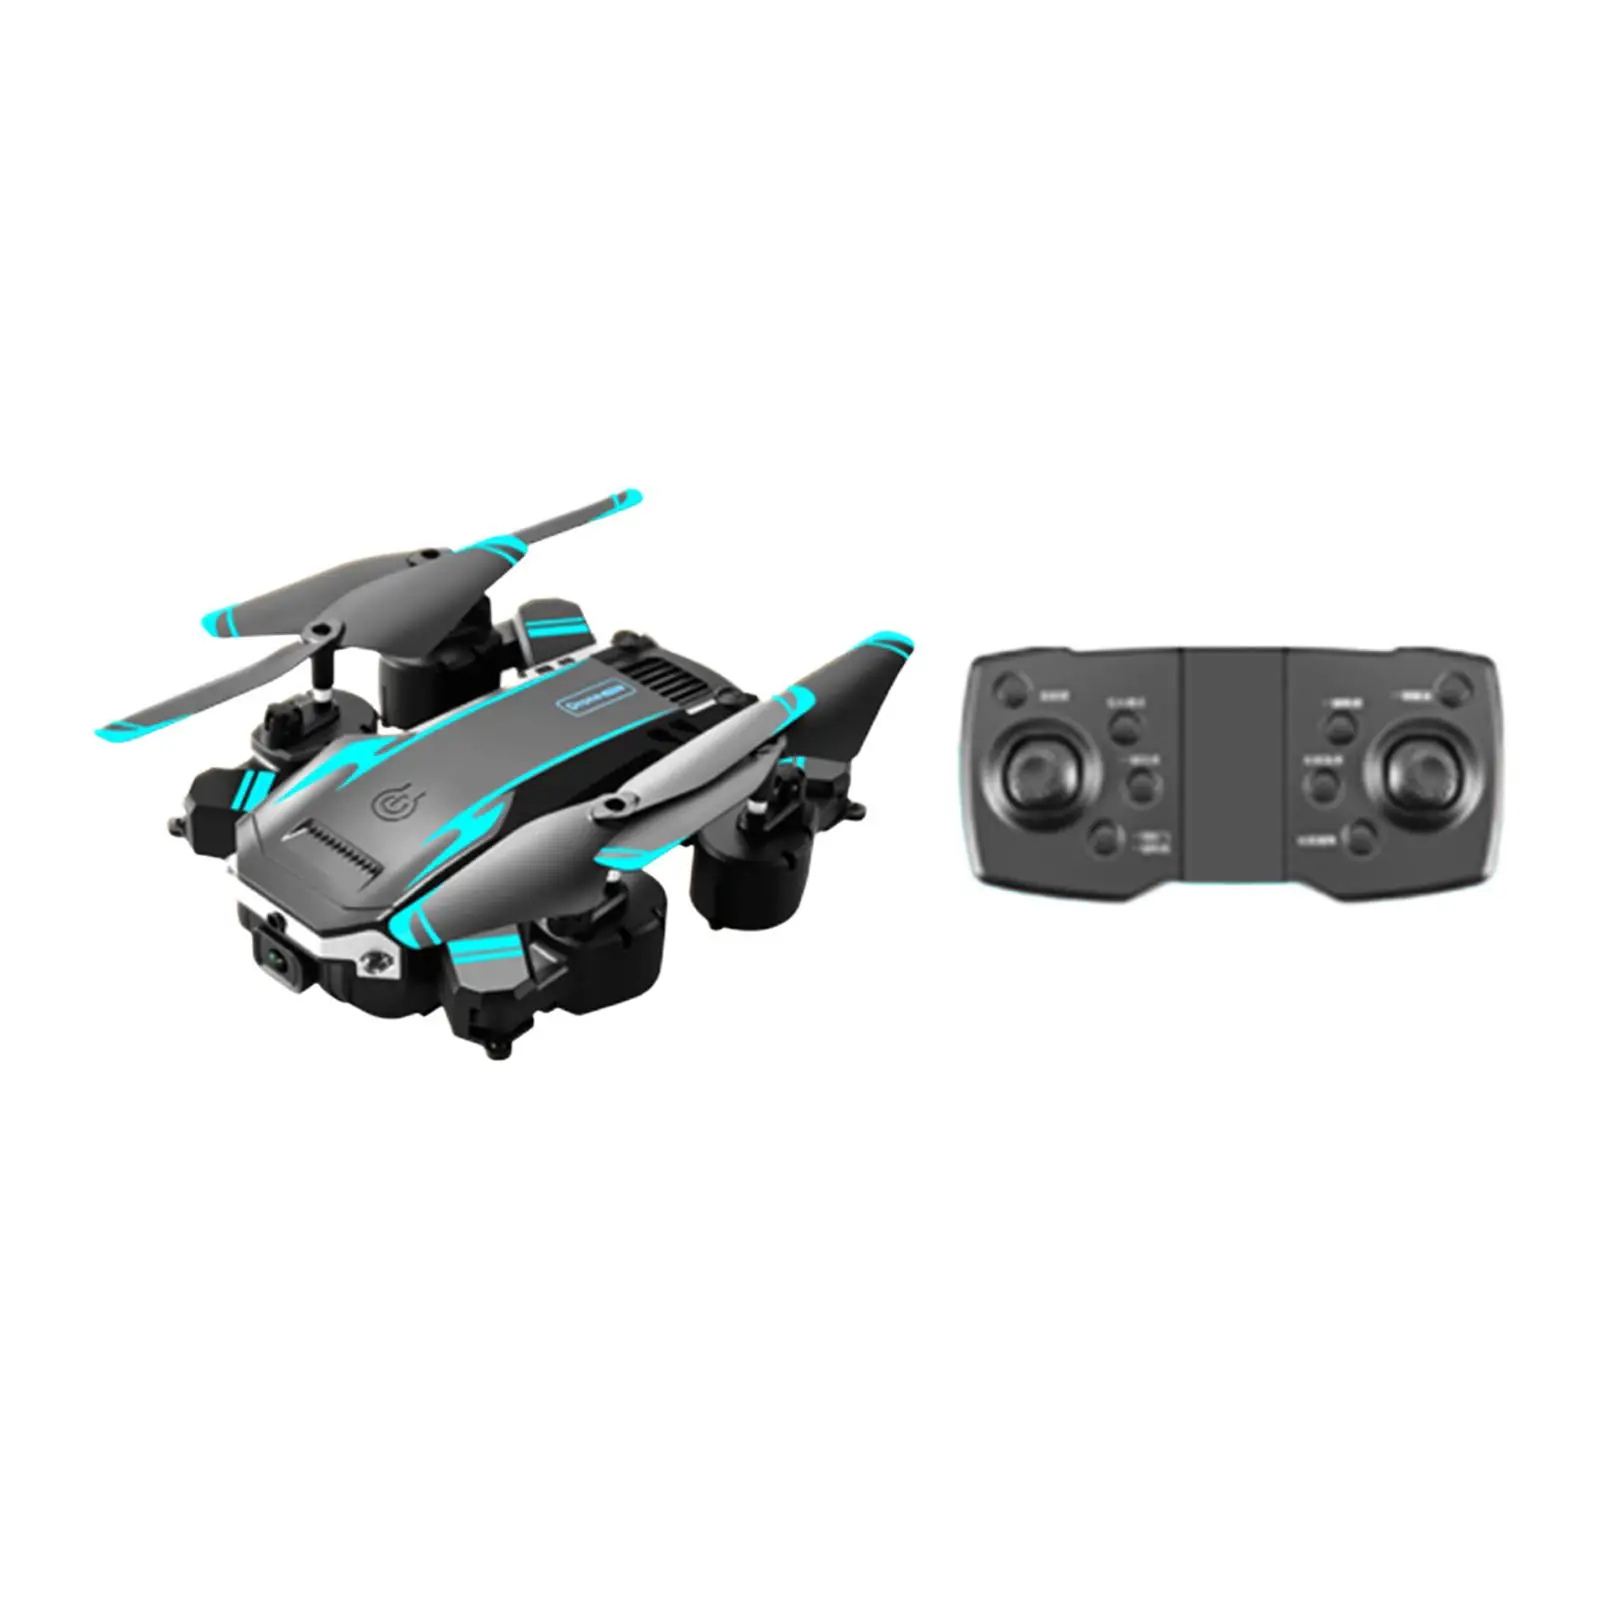 Remote Control Quadcopter Distance: 100M Professional Kids Toys Remote Control Toys for Beginner Girls Adults Boys Birthday Gift